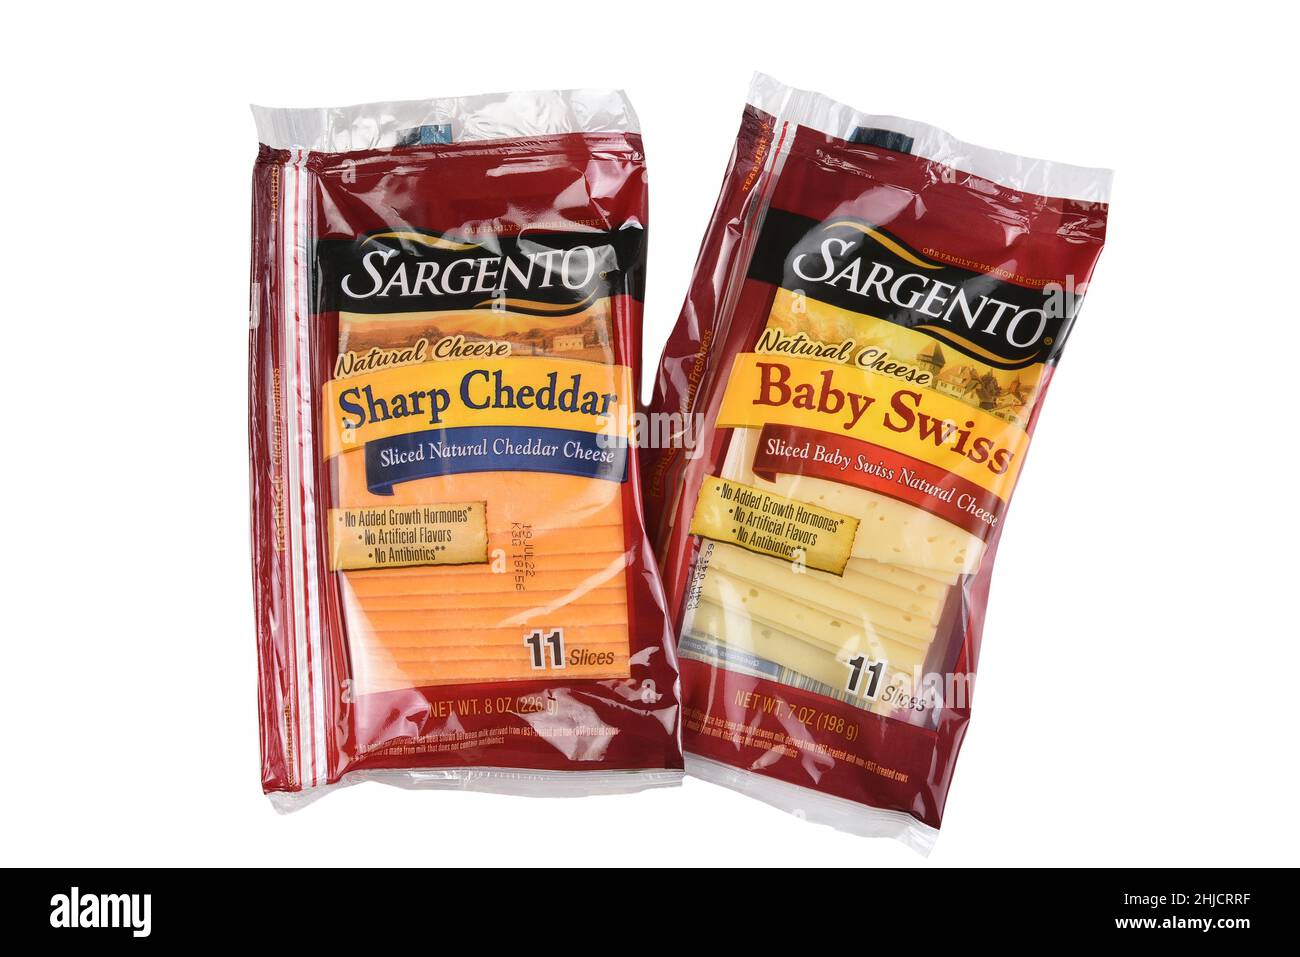 IRVINE, CALIFORNIA - 27 JAN 2022: Two packages of Sargento Sliced Cheese, Sharp Cheddar and Baby Swiss. Stock Photo